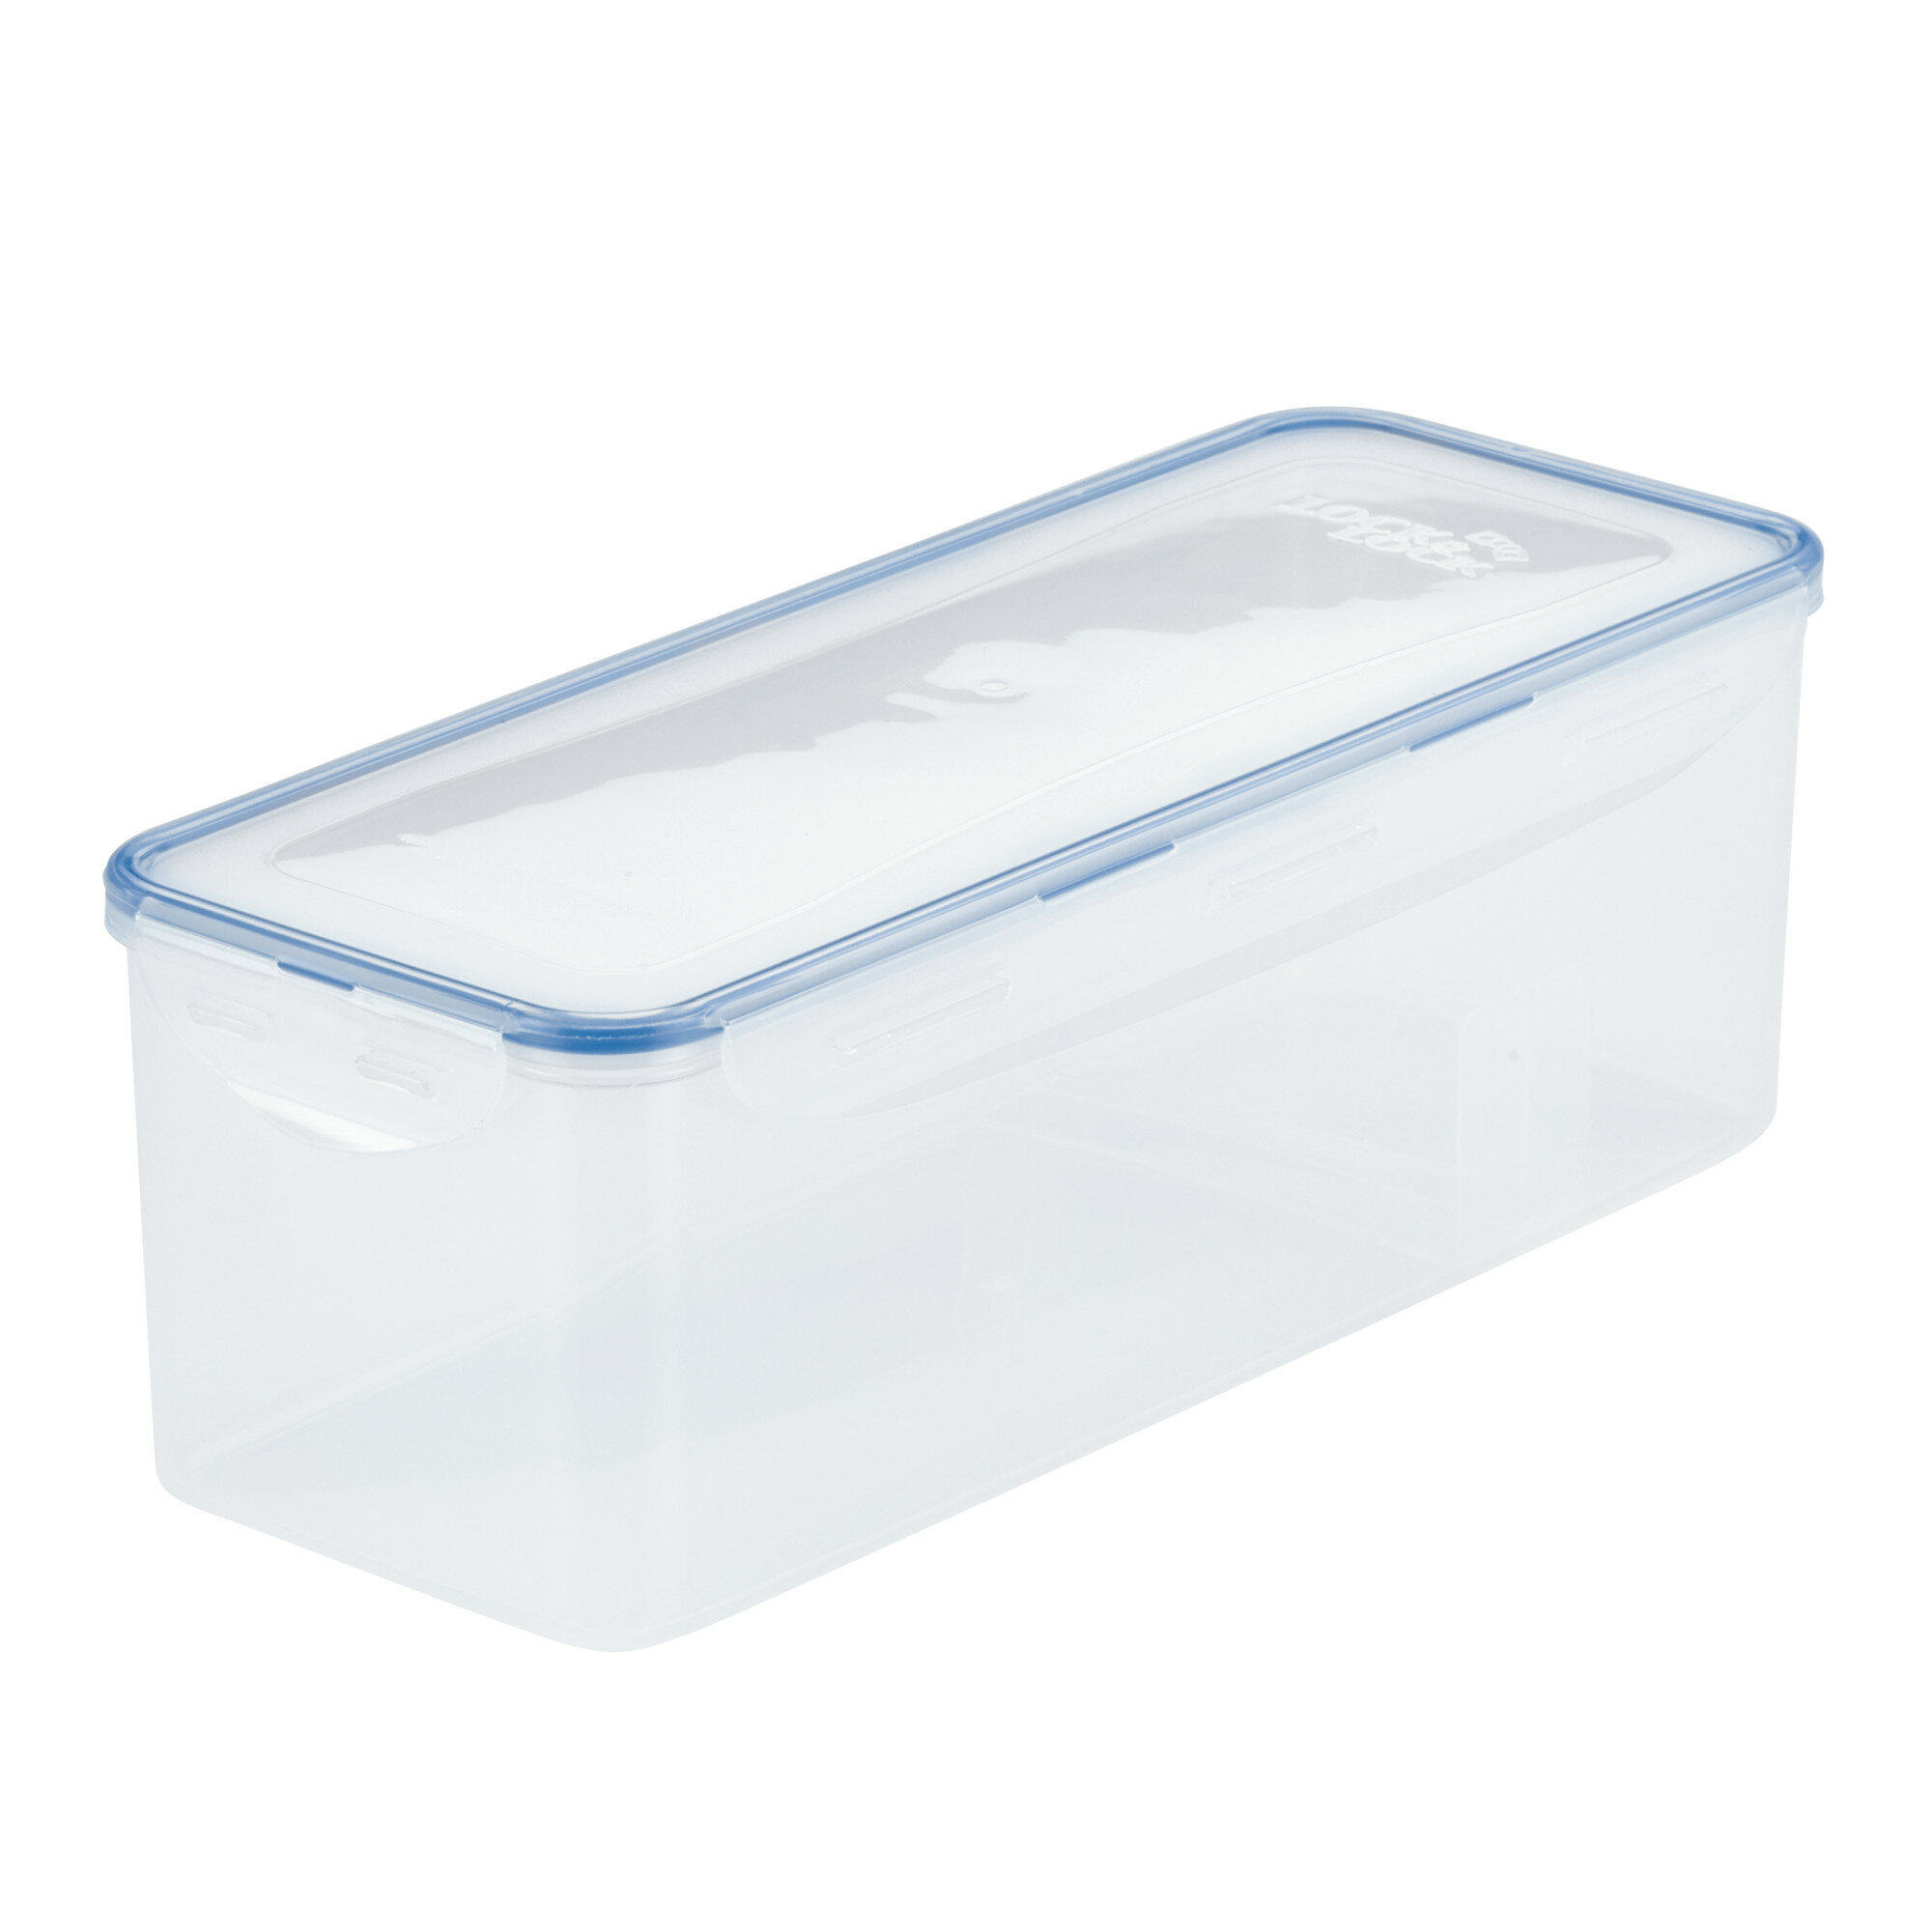 LocknLock Easy Essentials Pantry Bread Box with Divider, 21.1-Cup & Reviews